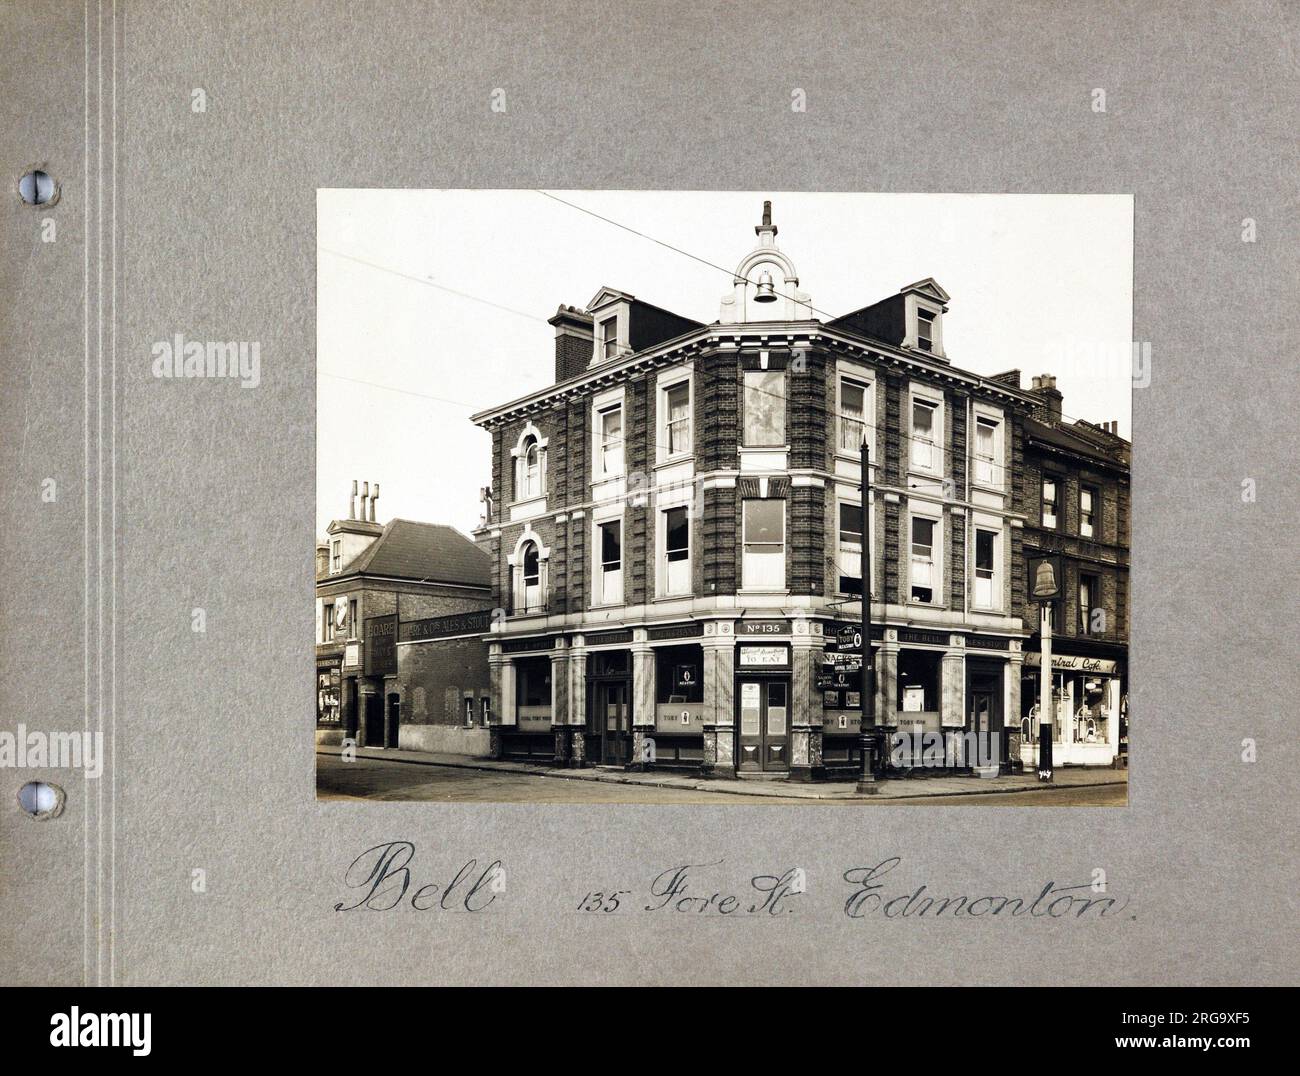 Photograph of Bell PH, Edmonton, London. The main side of the print (shown here) depicts: Corner on view of the pub.  The back of the print (available on request) details: Nothing for the Bell, Edmonton, London N18 2XF. As of July 2018 . Demolished Stock Photo